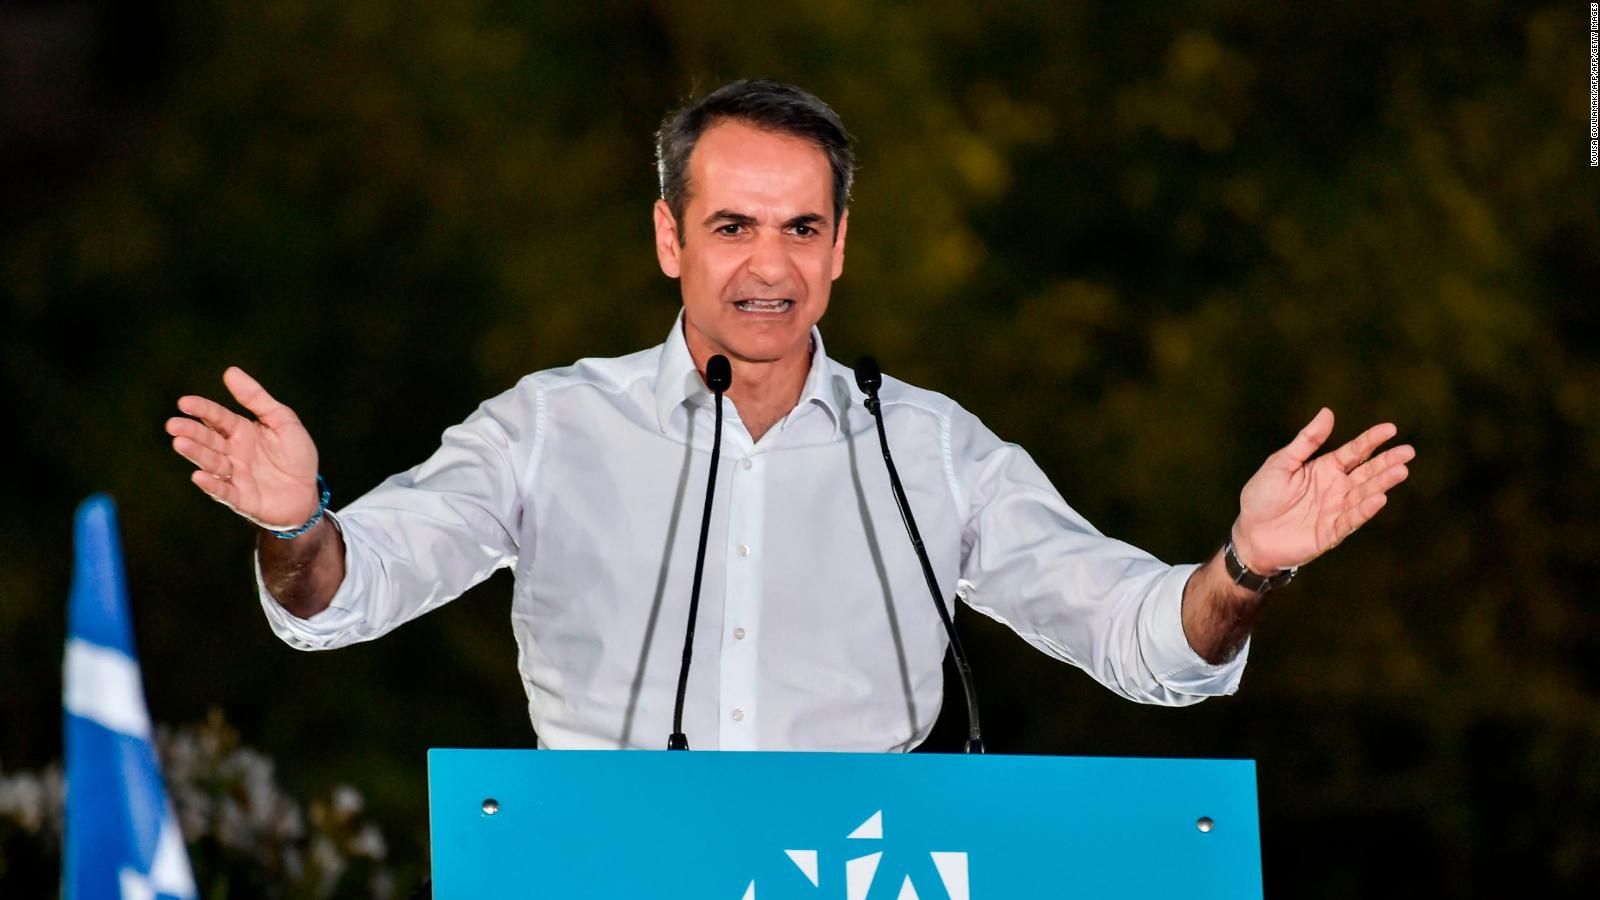 Greek elections New Democracy party victory signals end of leftwing